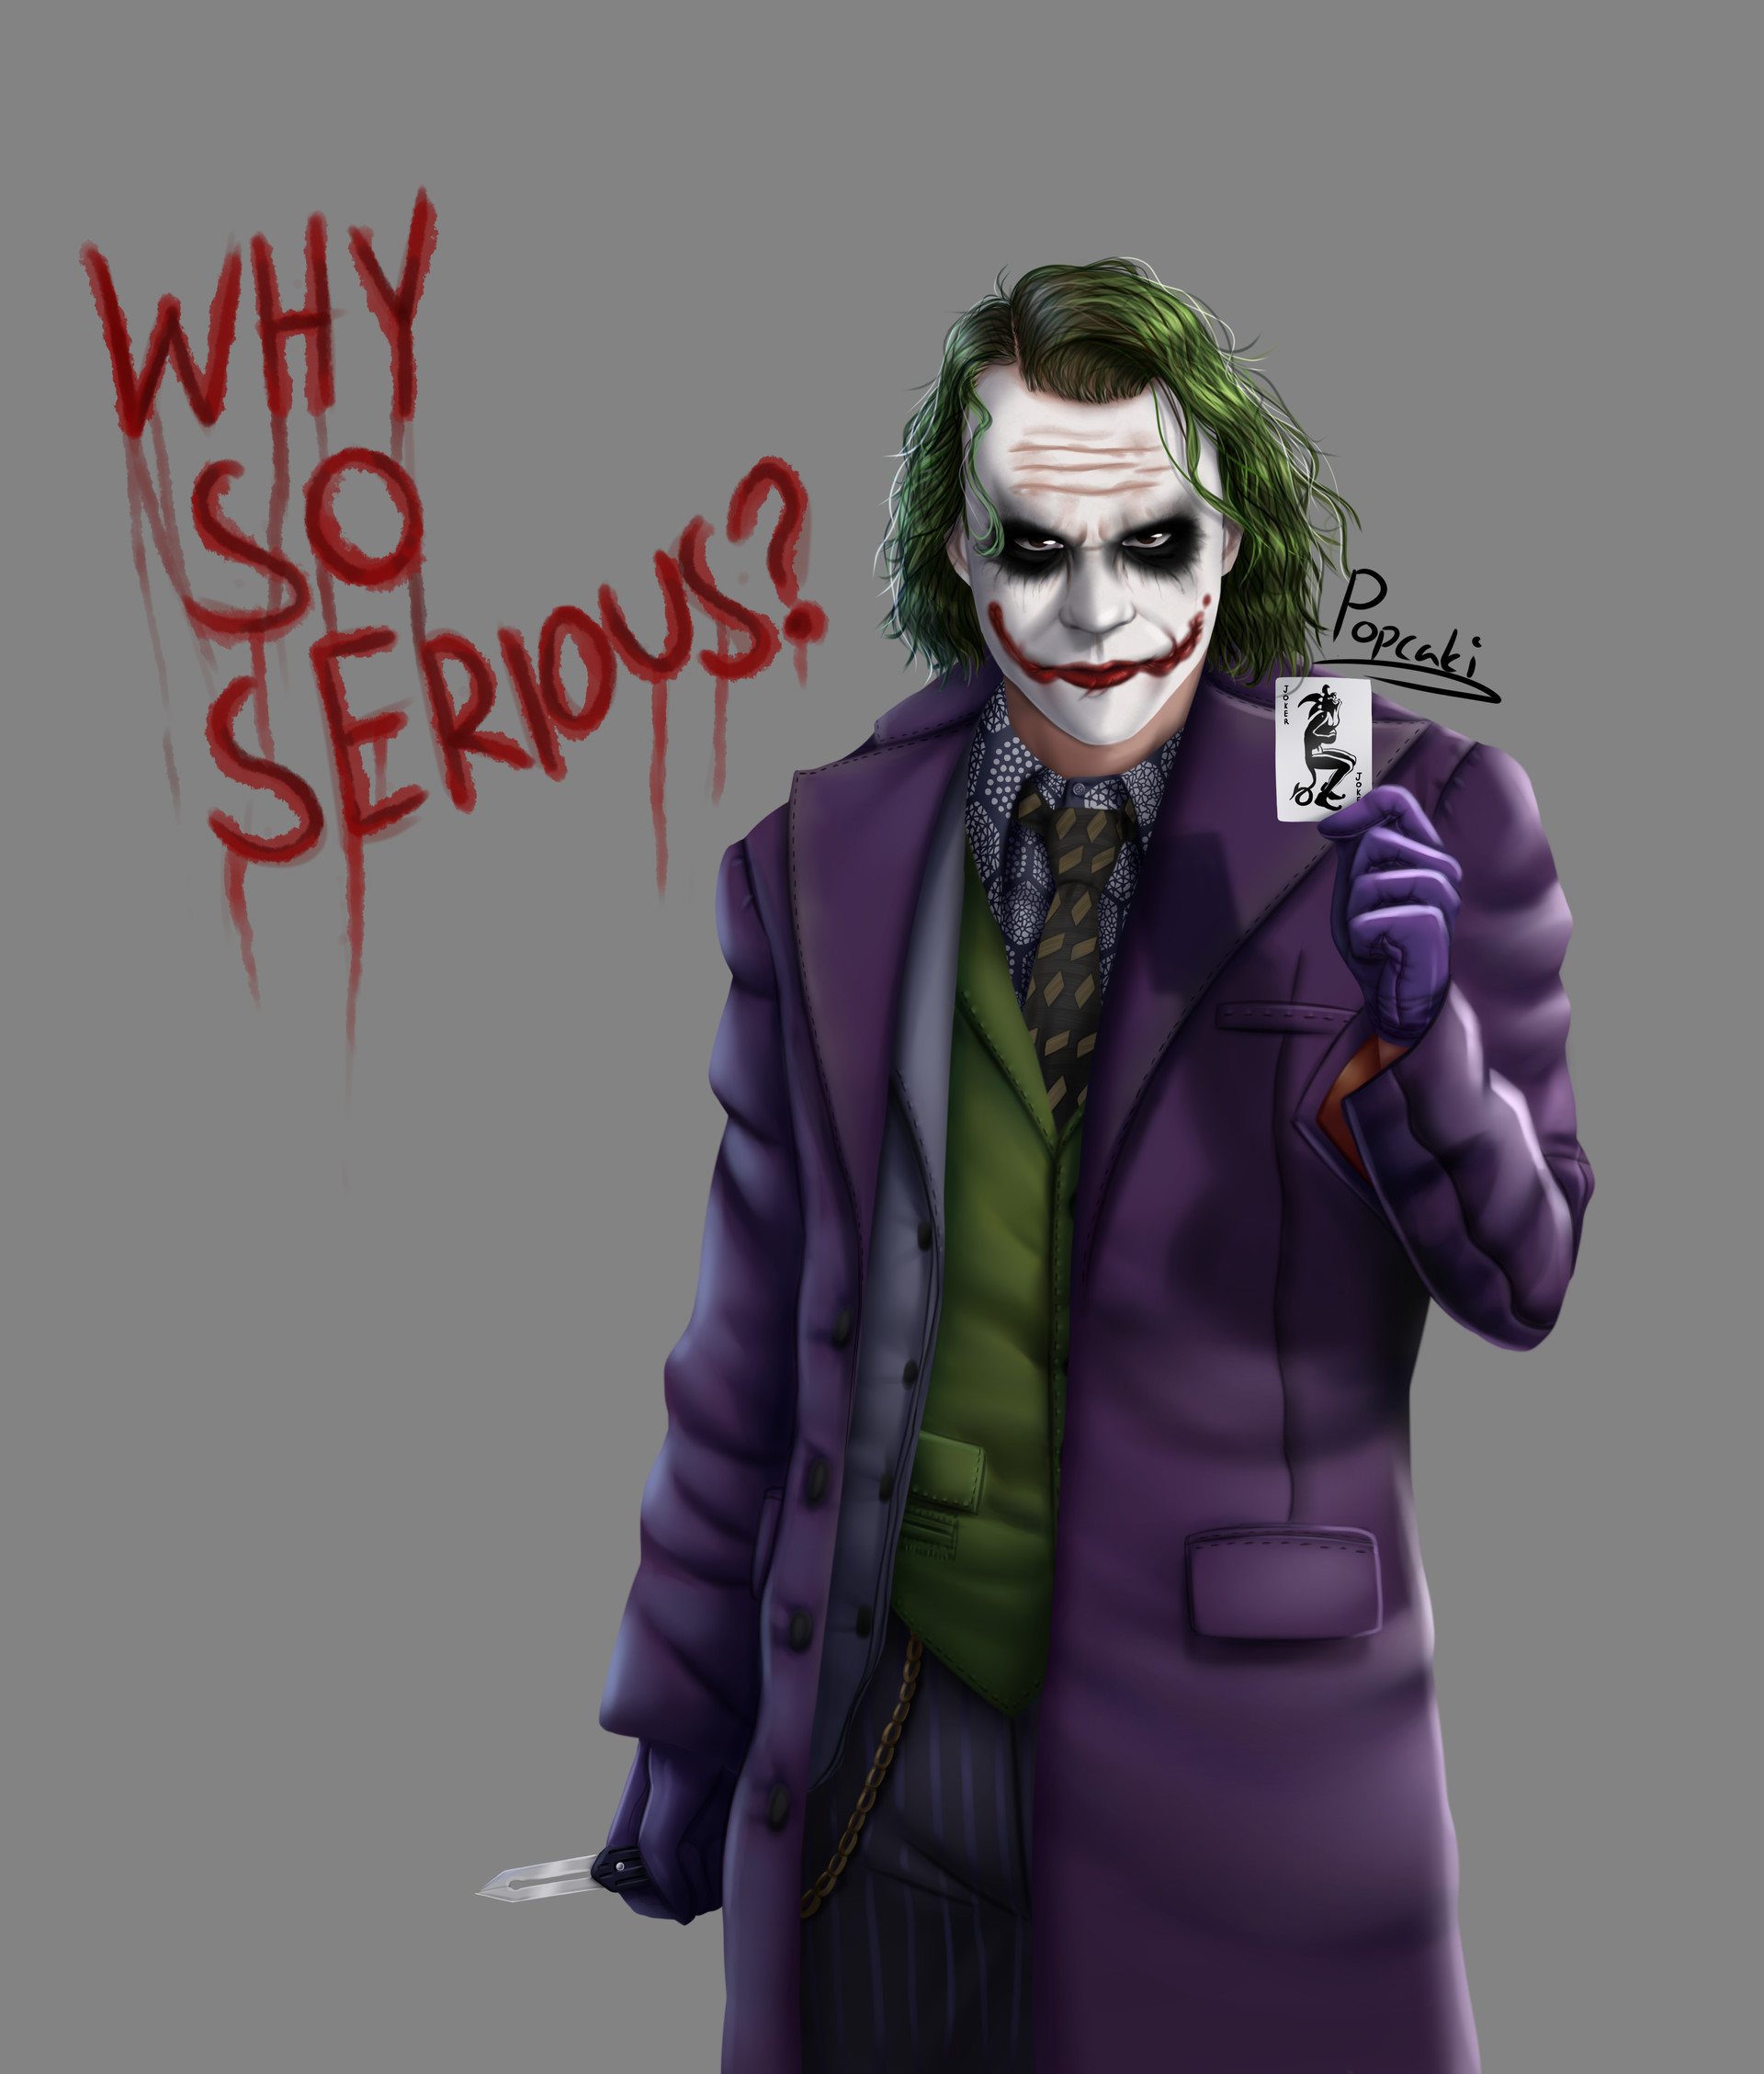 Why do serious. Джокер хит Леджер why so serious.